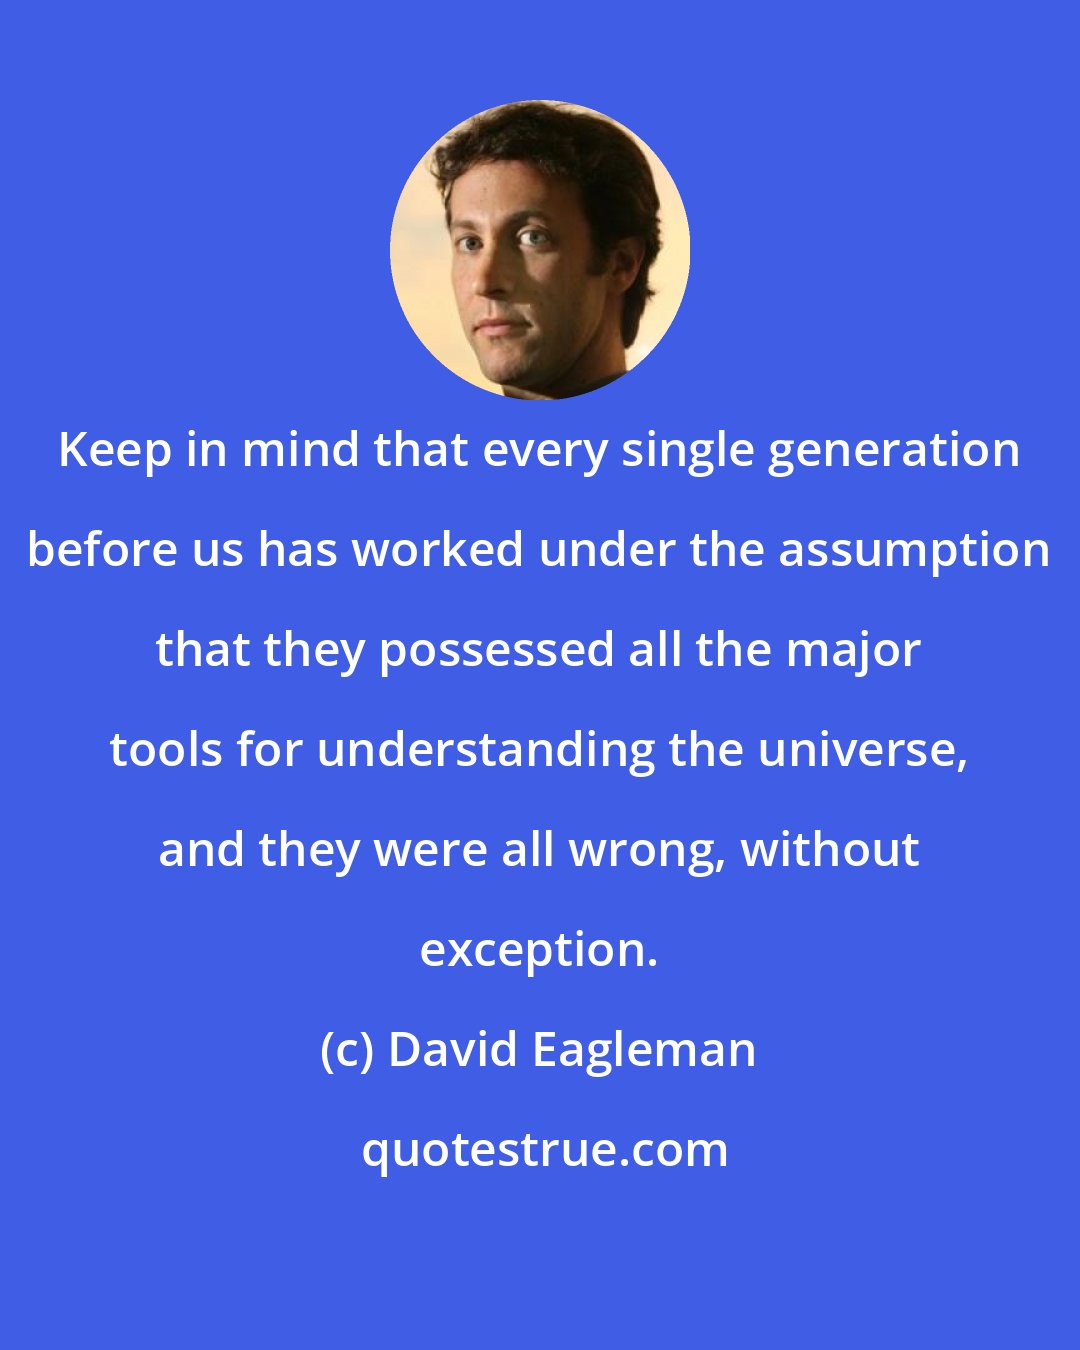 David Eagleman: Keep in mind that every single generation before us has worked under the assumption that they possessed all the major tools for understanding the universe, and they were all wrong, without exception.